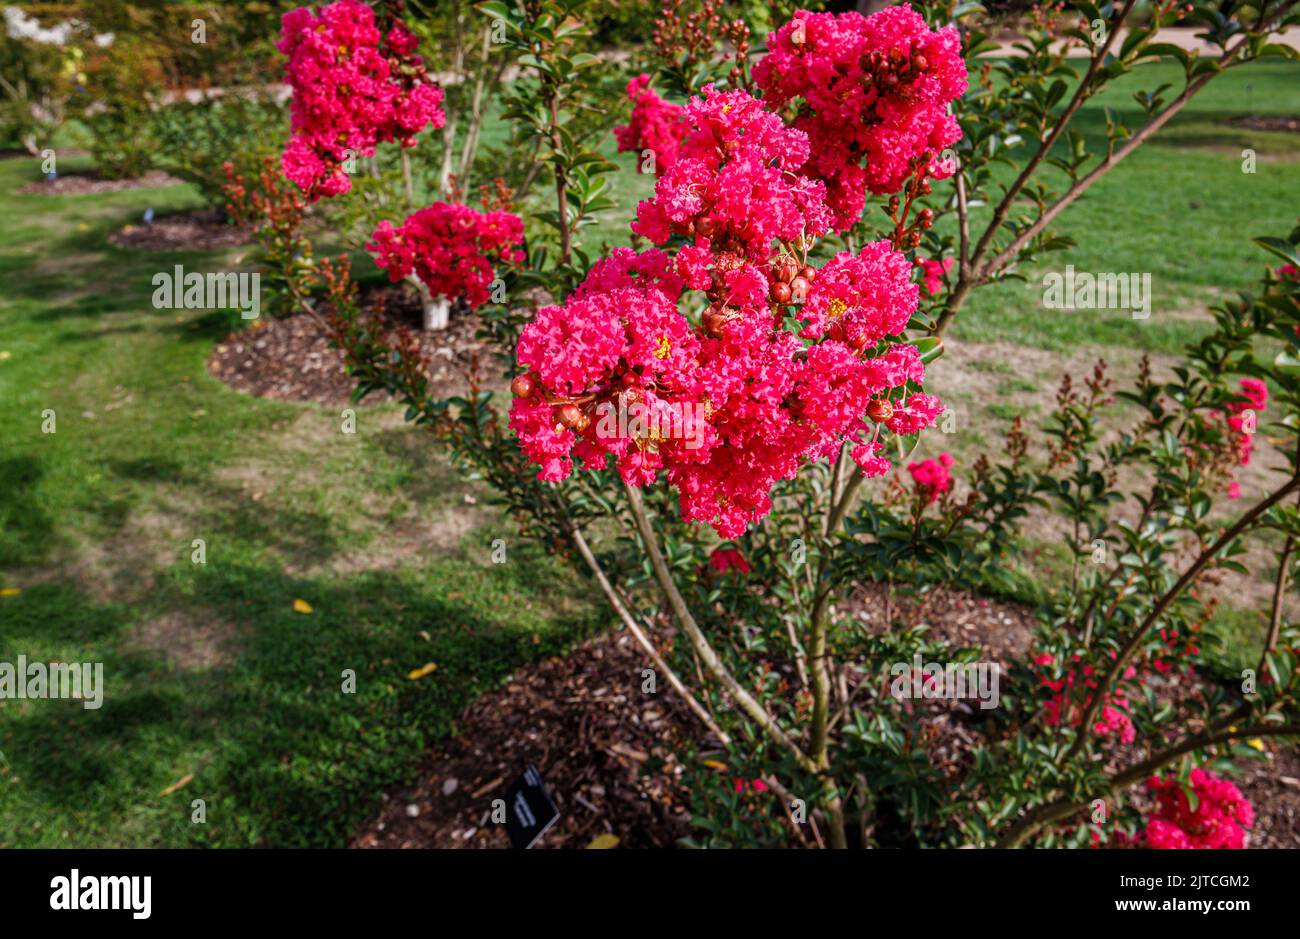 Red Lagerstroemia 'Tuscarora' or crape myrtle 'Tuscarora' with red to coral pink flowers in bloom at RHS Garden, Wisley in late summer to early autumn Stock Photo